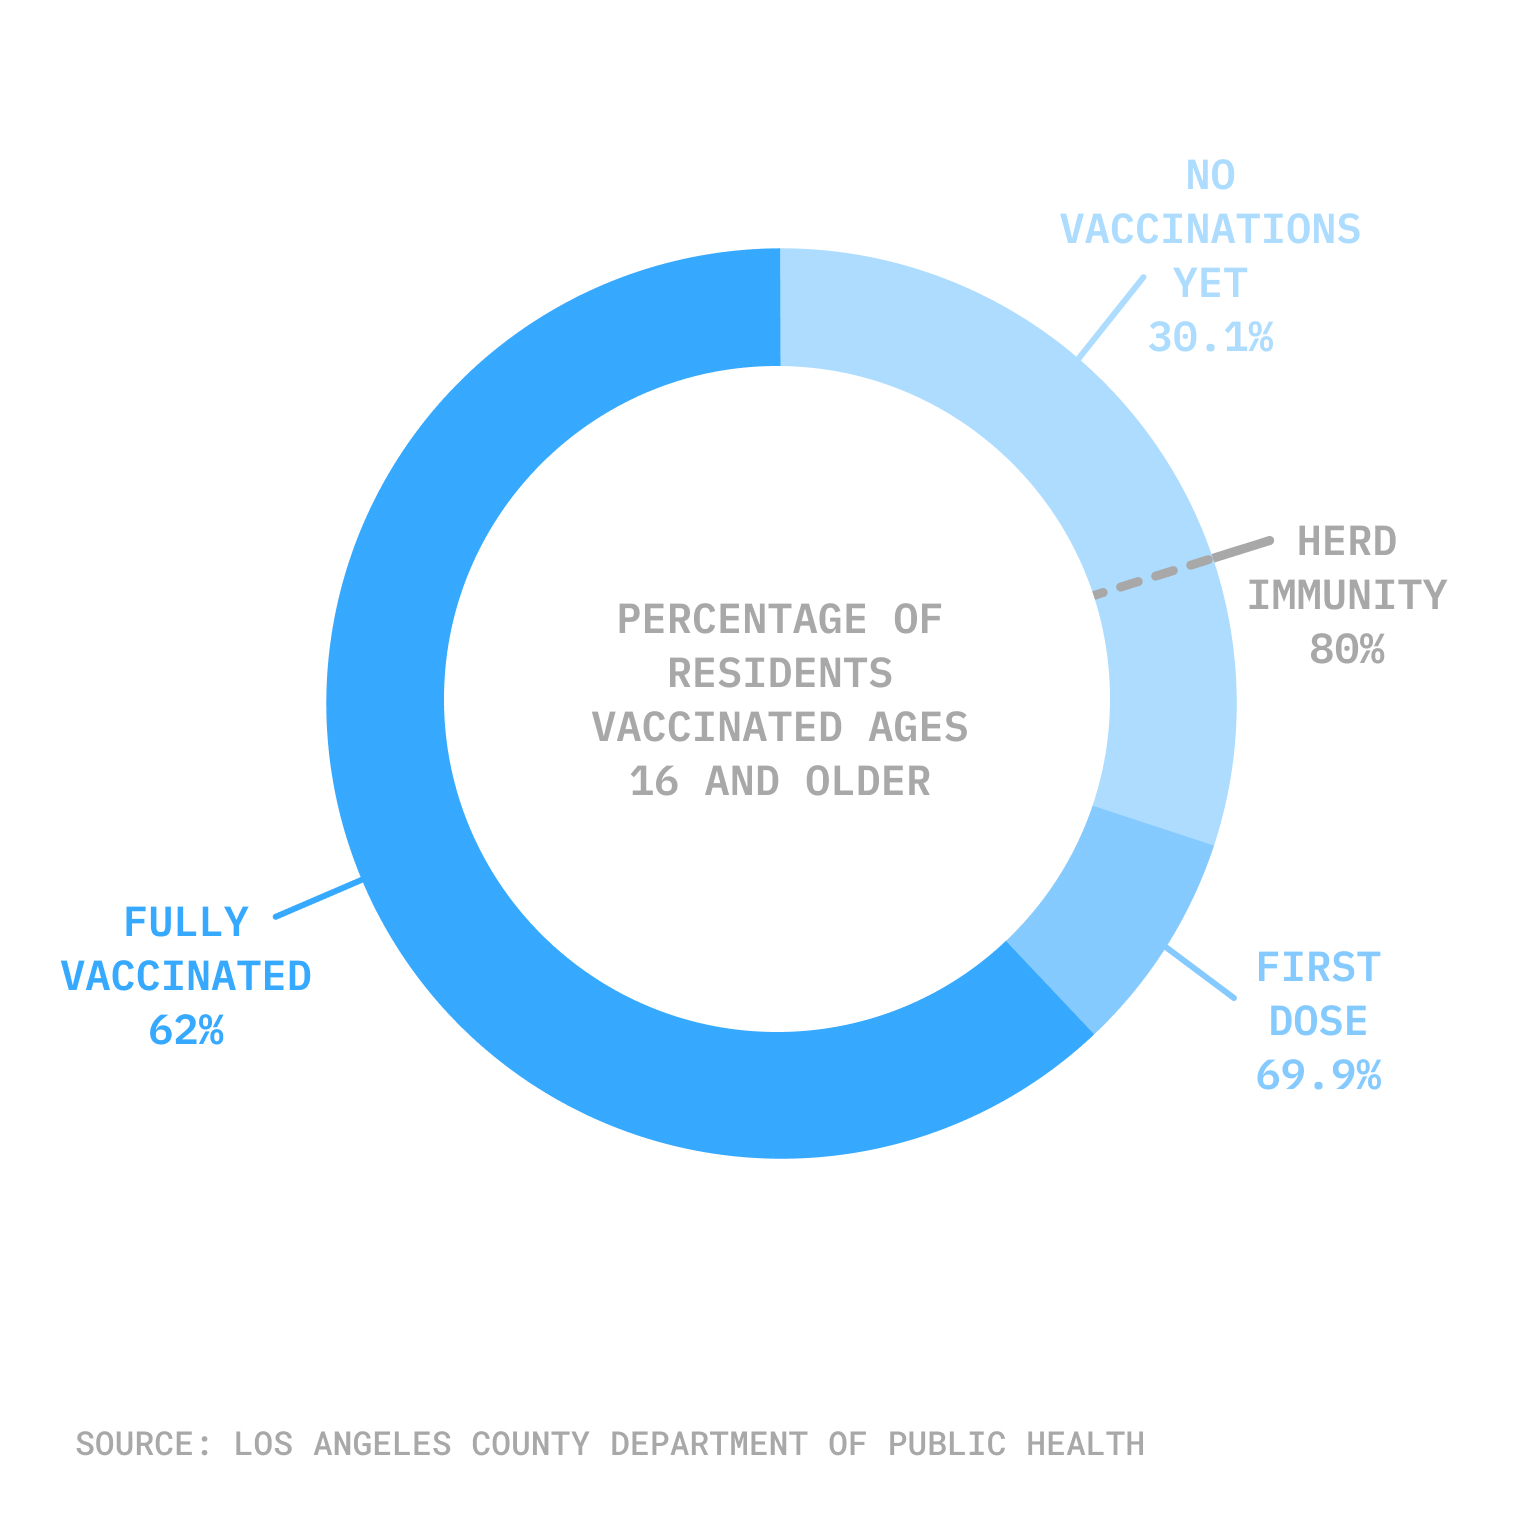 Percentage of Residents Vaccinated Aged 16 and Older